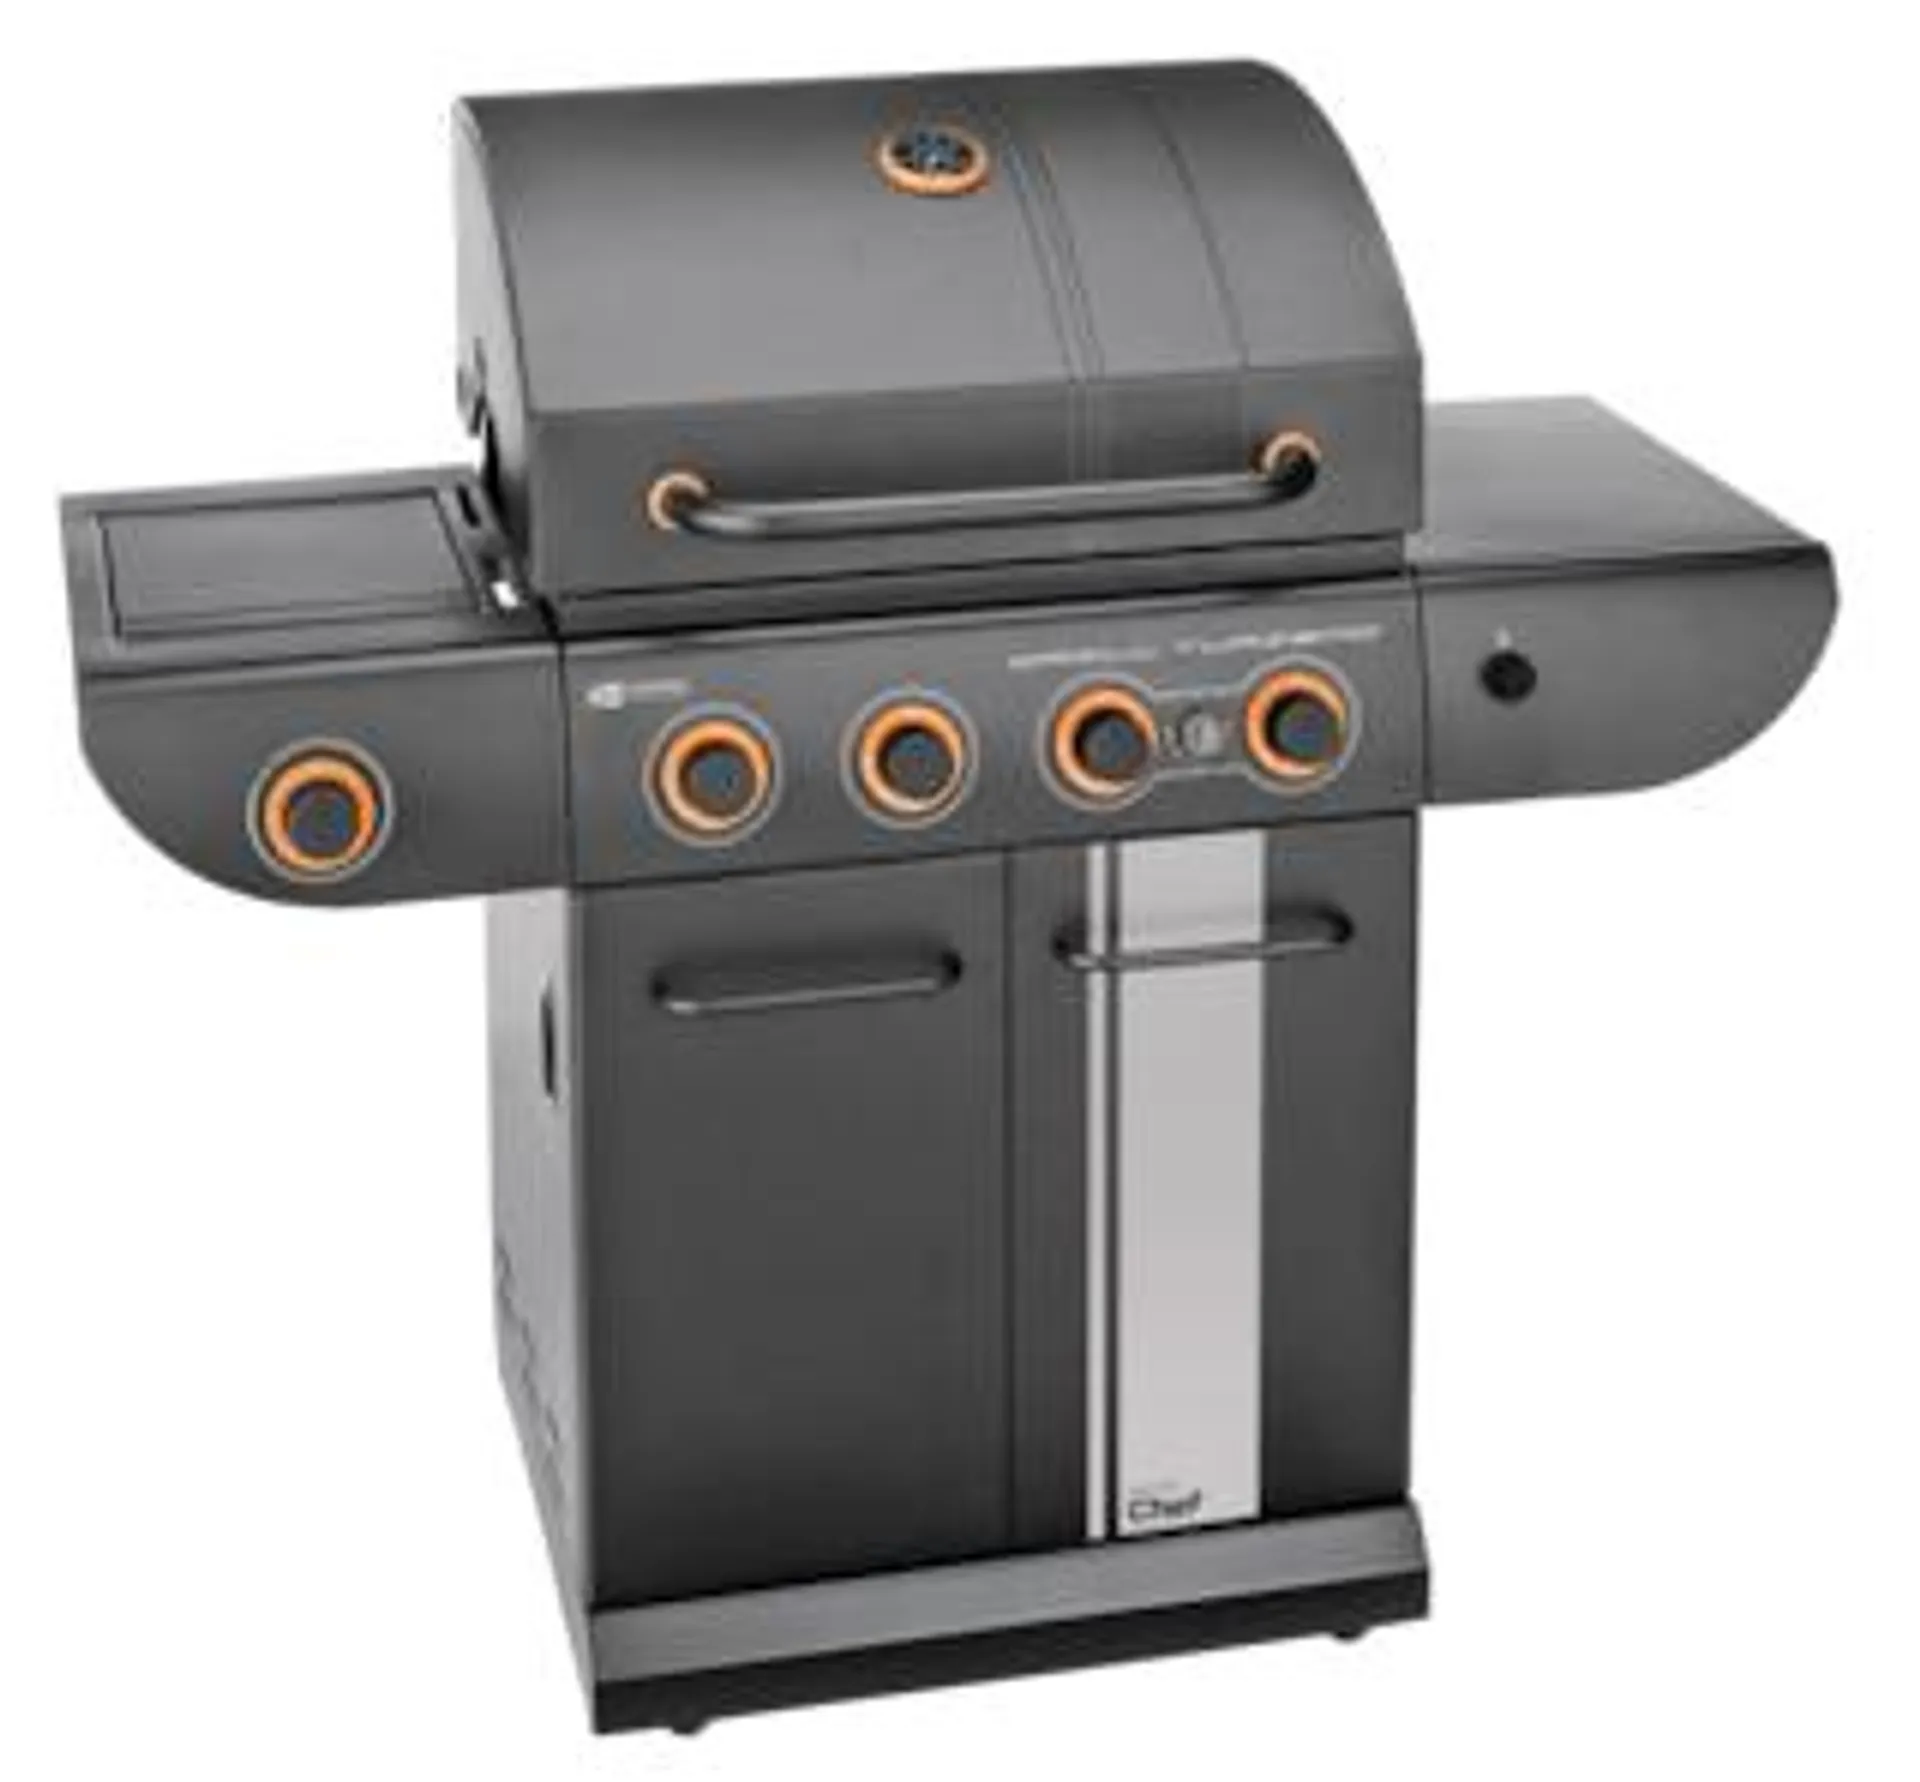 MASTER Chef Grill Turismo 5-Burner Convertible Propane Gas BBQ Grill with a Side Burner